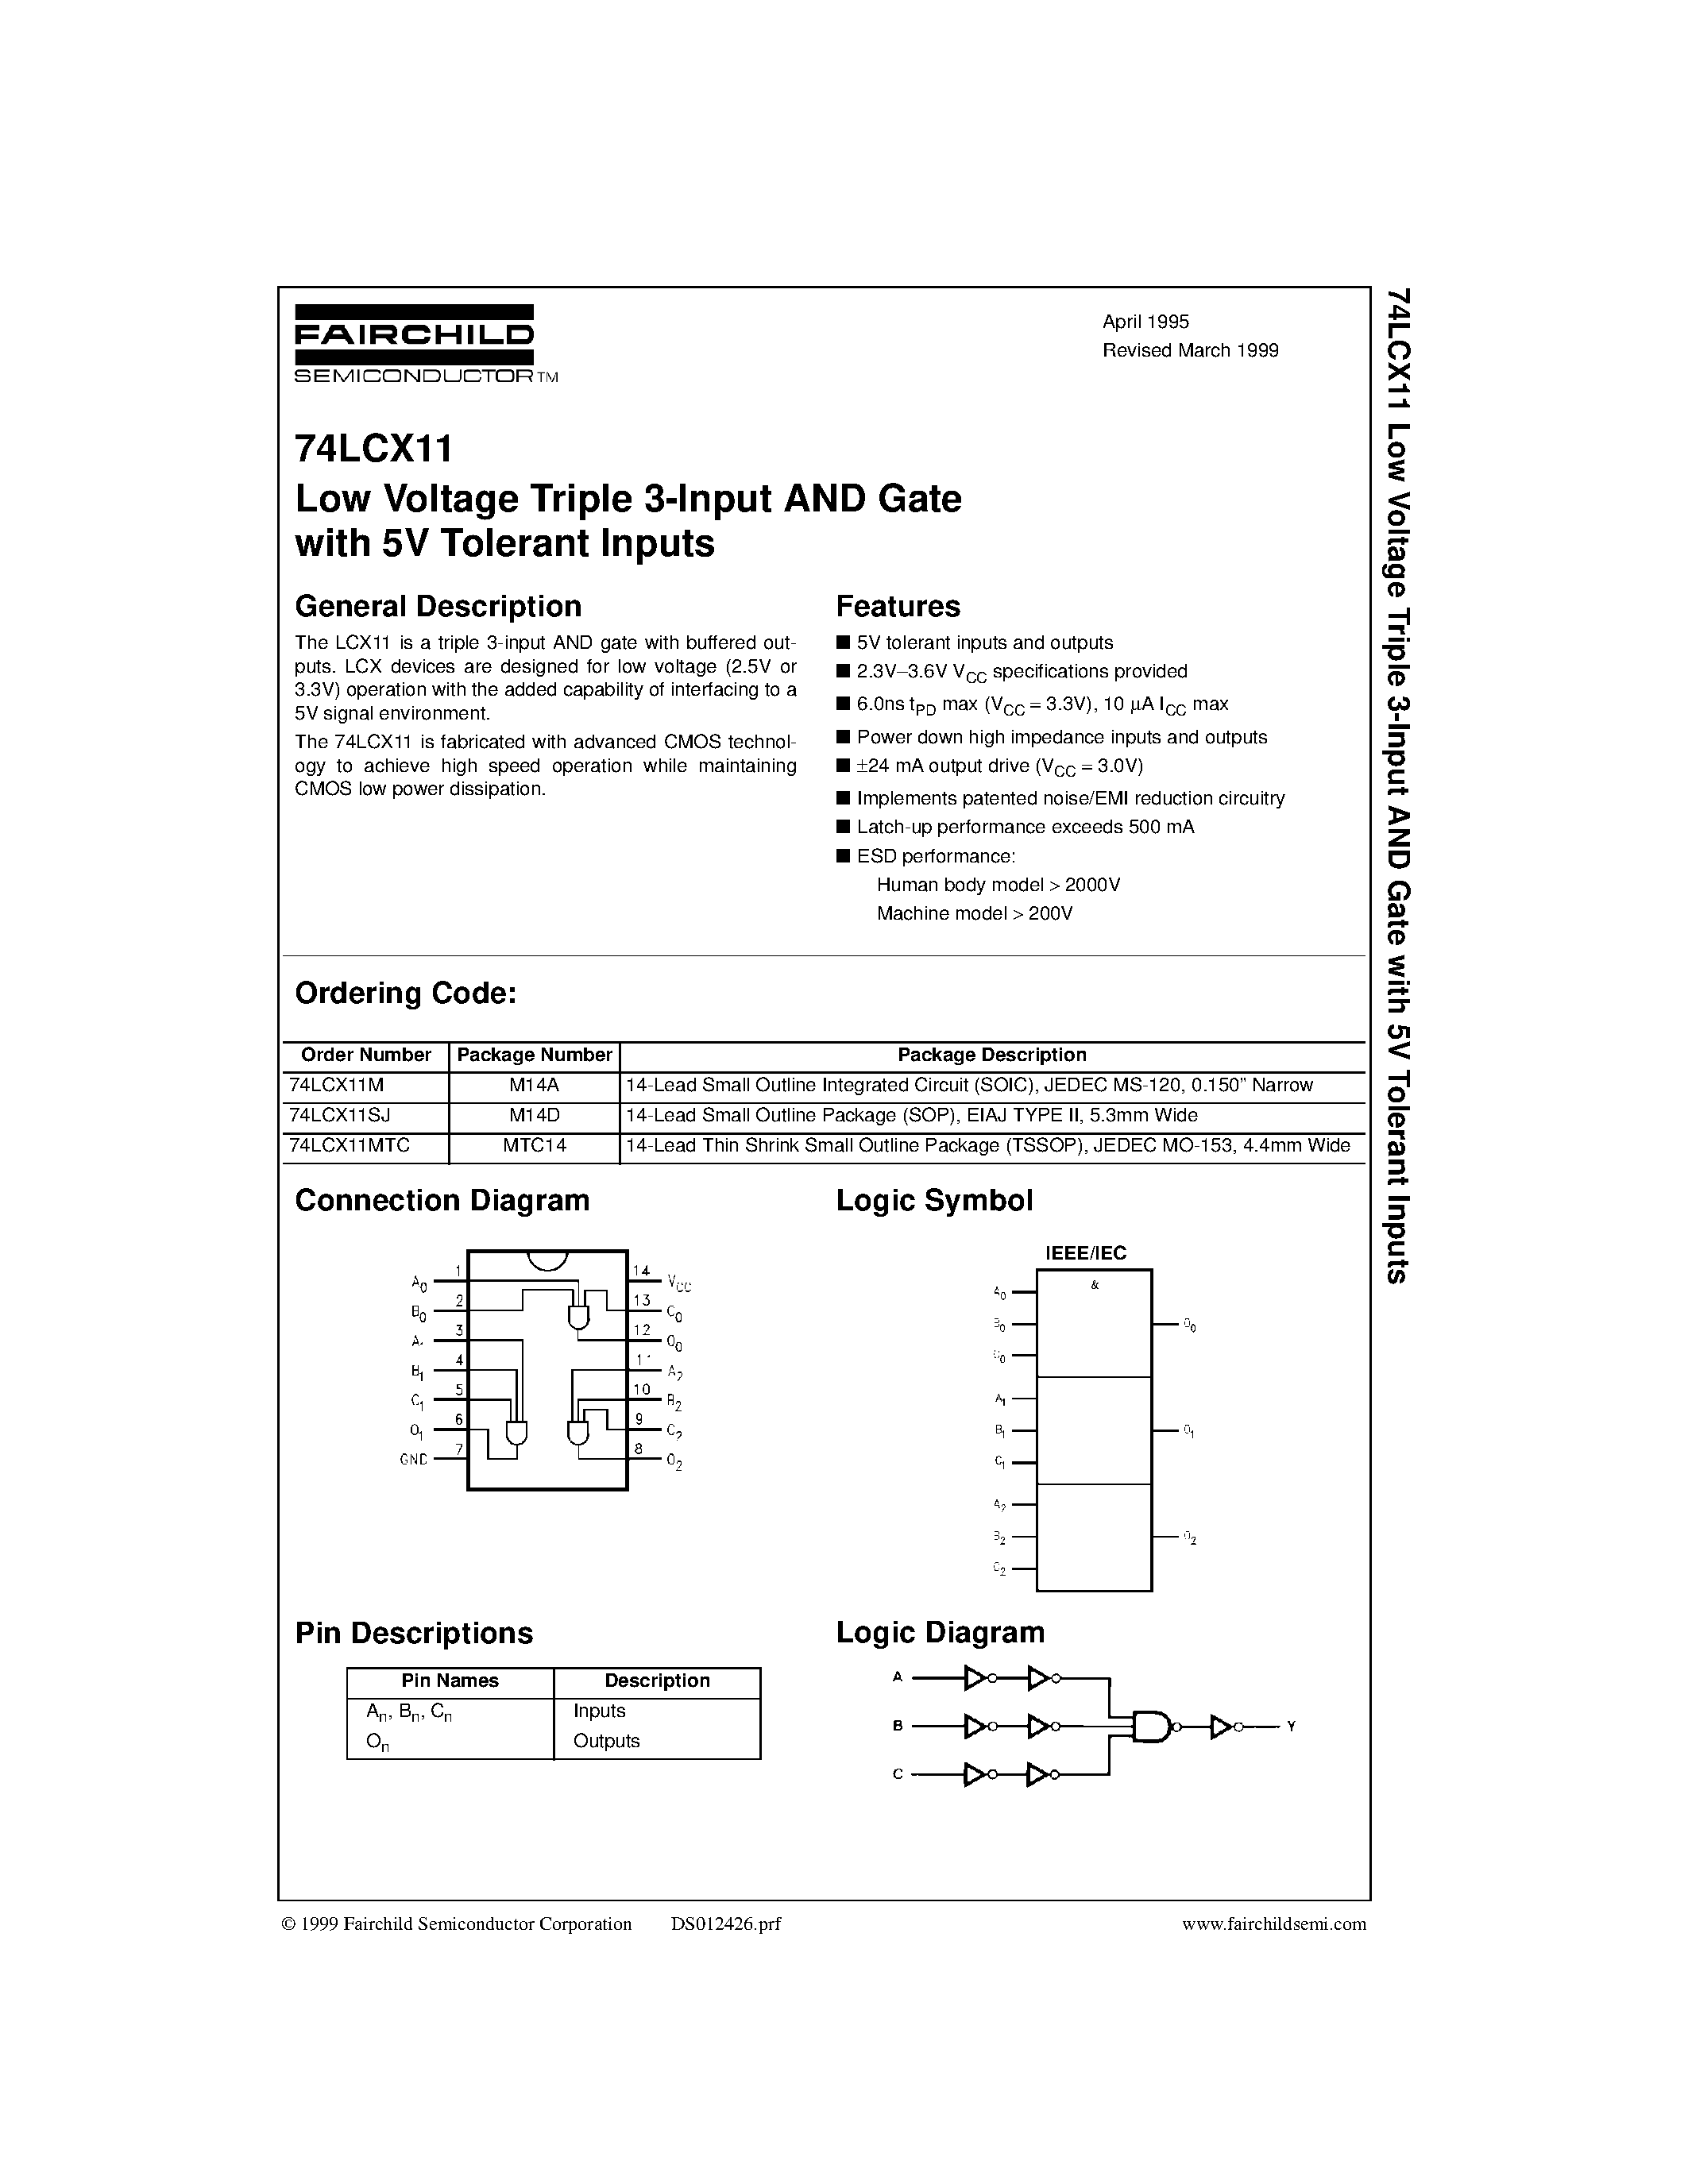 Datasheet 74LCX11SJ - Low Voltage Triple 3-Input AND Gate with 5V Tolerant Inputs page 1